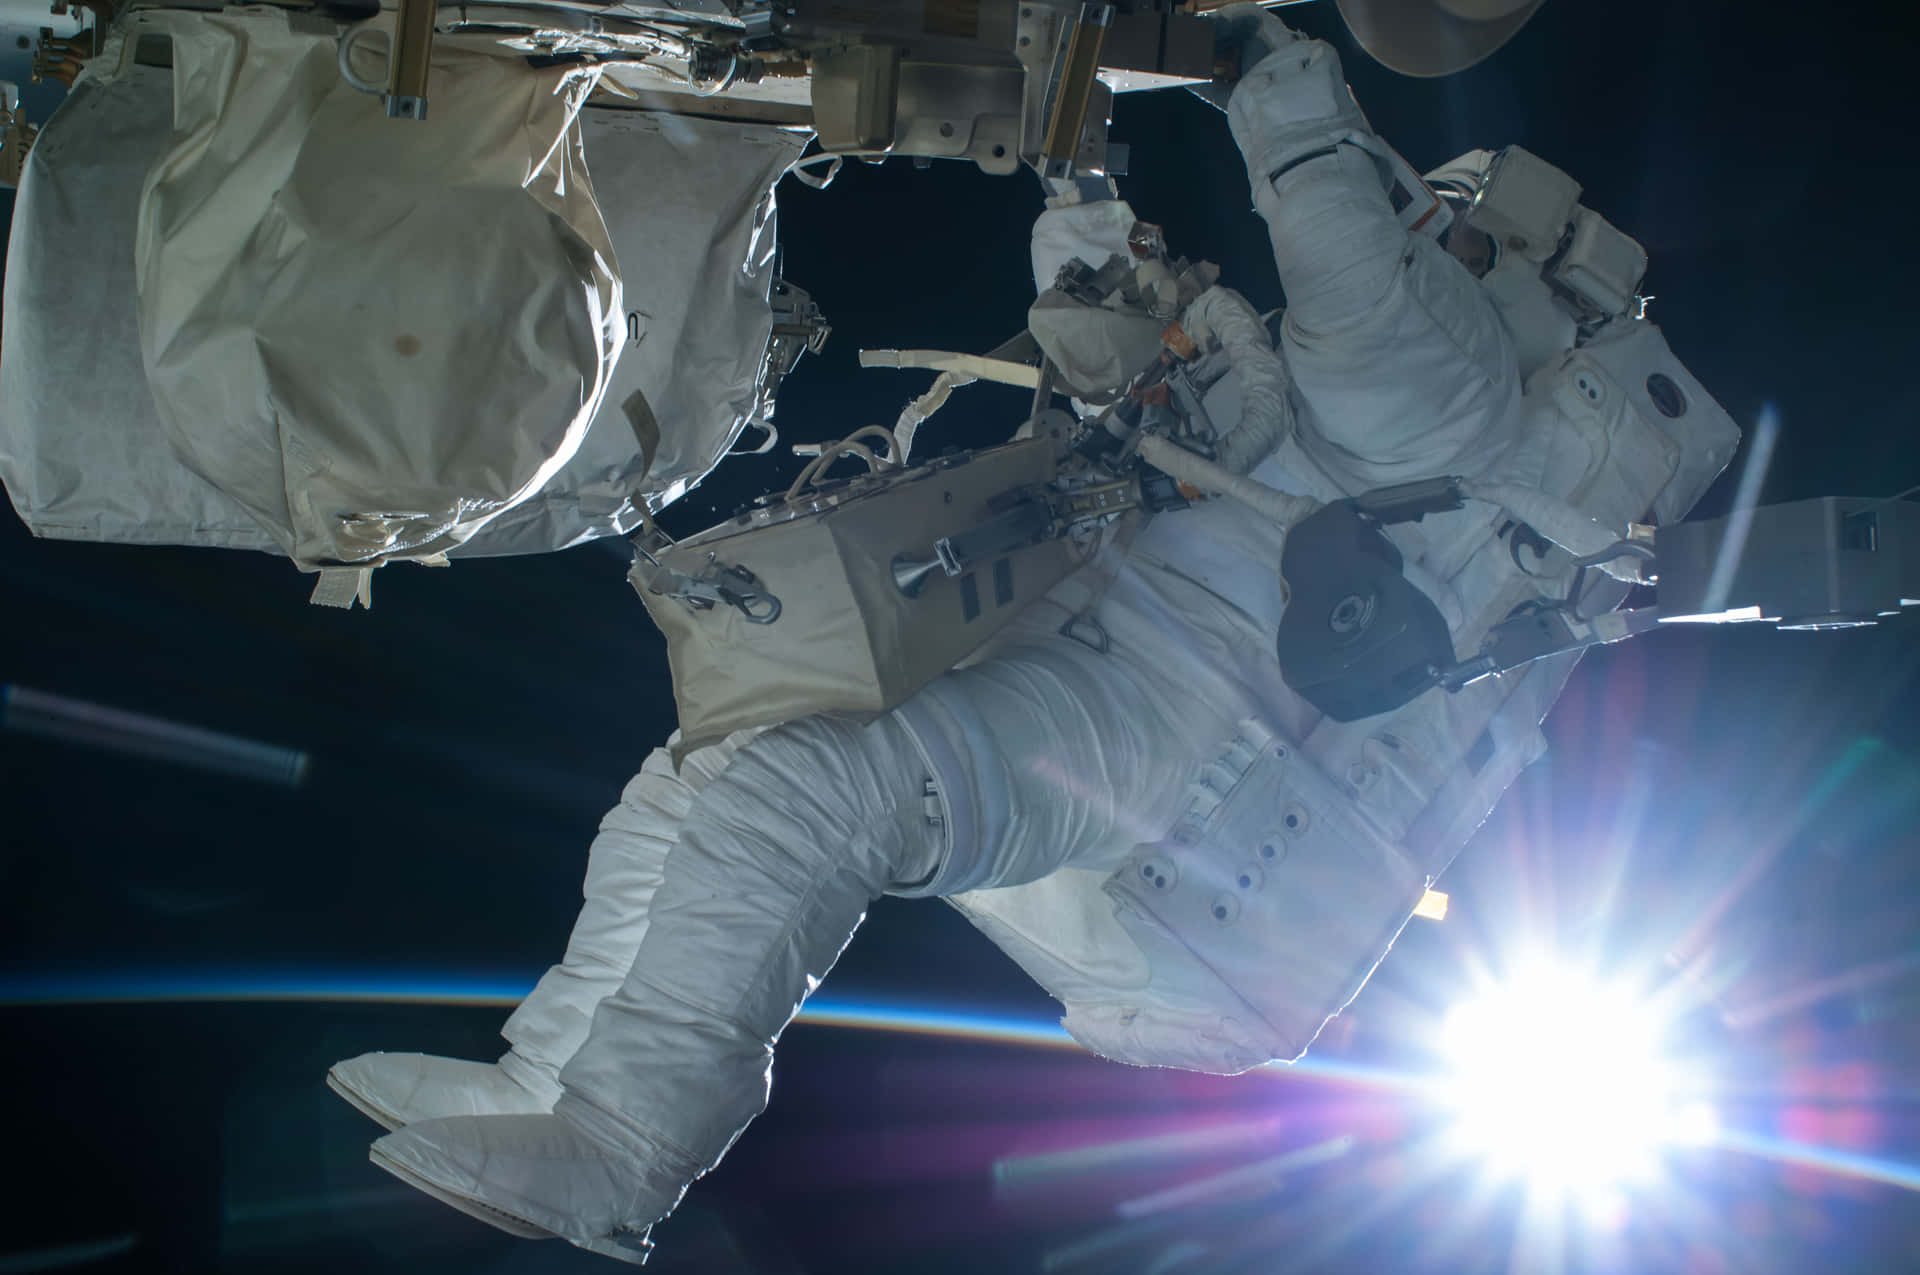 A daring astronaut ventures into vast, unknown space